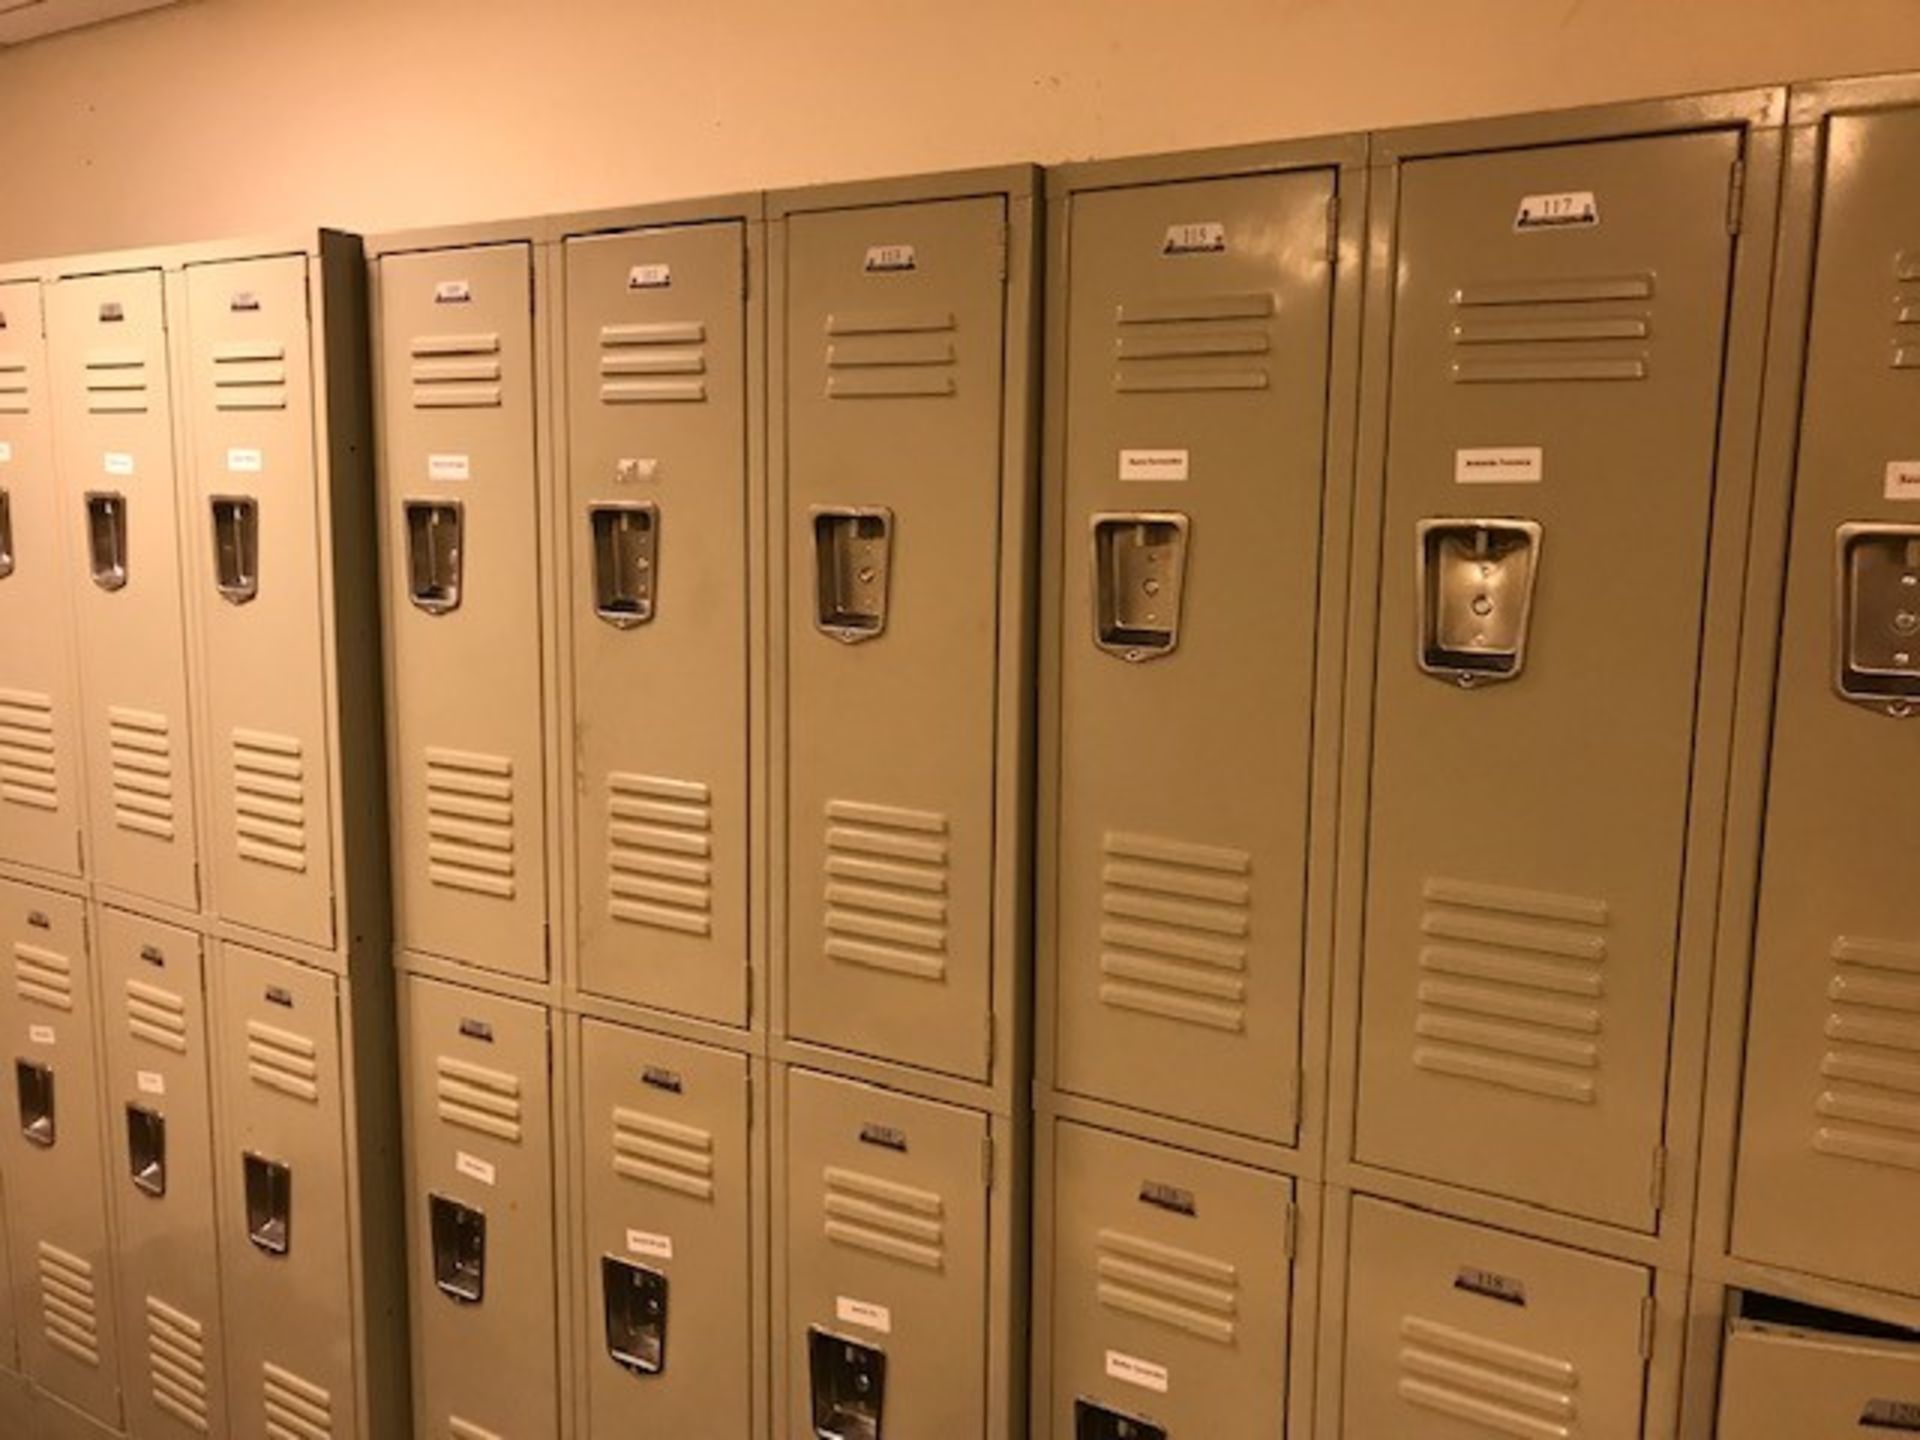 (43) Penco Products Lockers 12" x 12" x 35" - Image 2 of 2